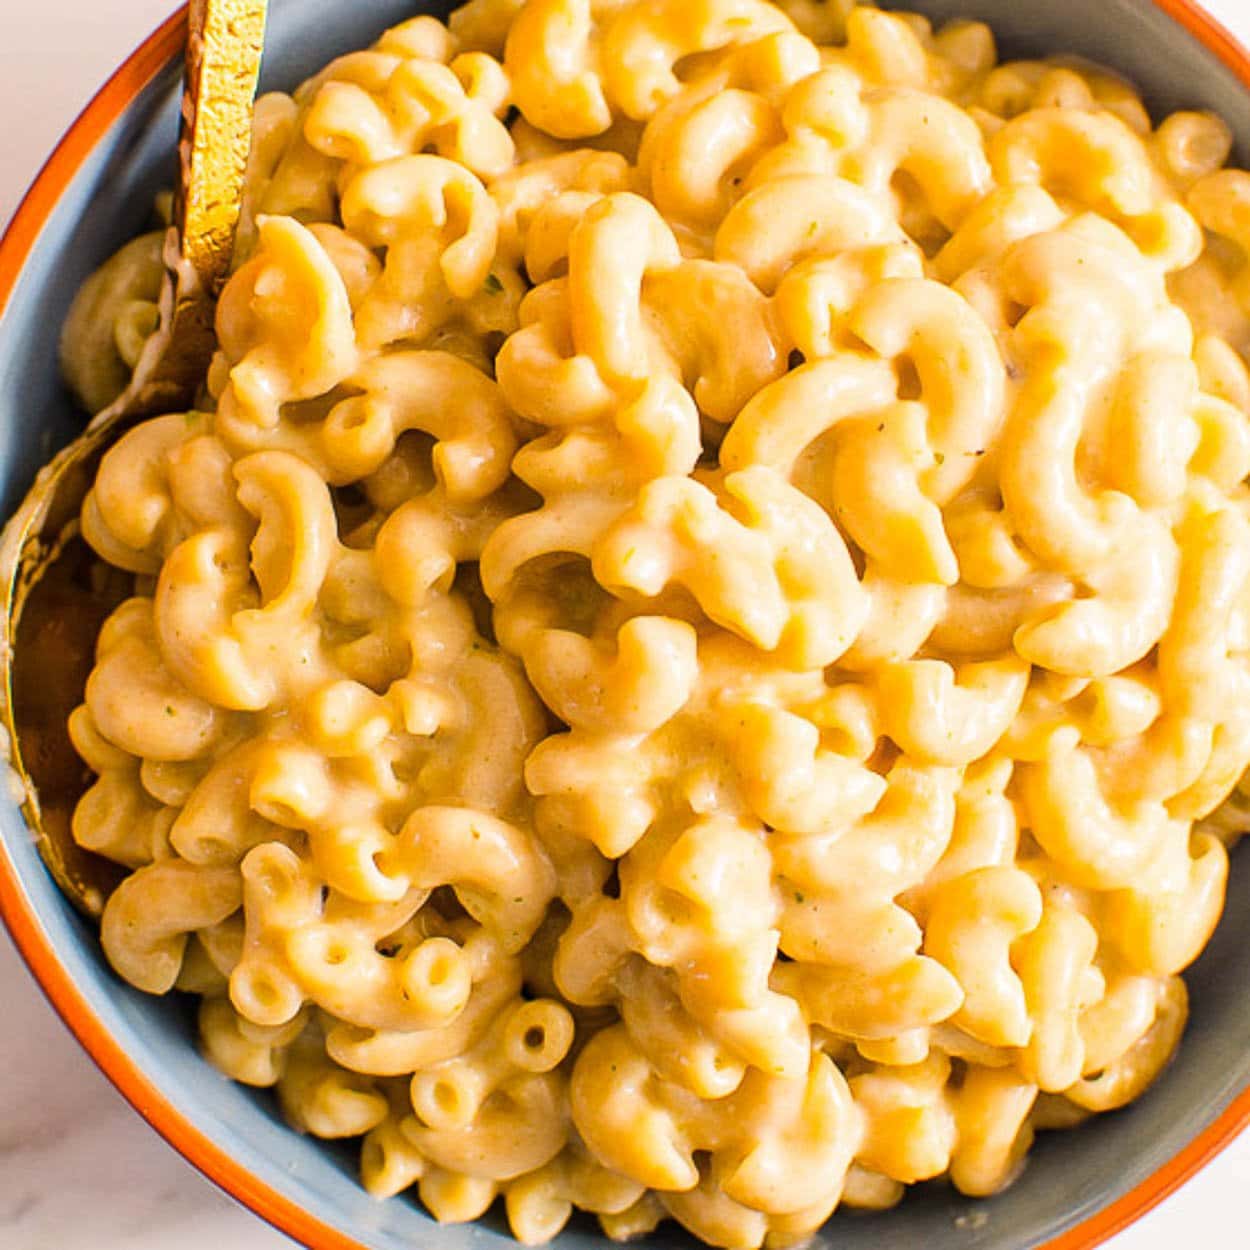 Kraft Mac N Cheese Macaroni and Cheese Kids Frozen Meal with